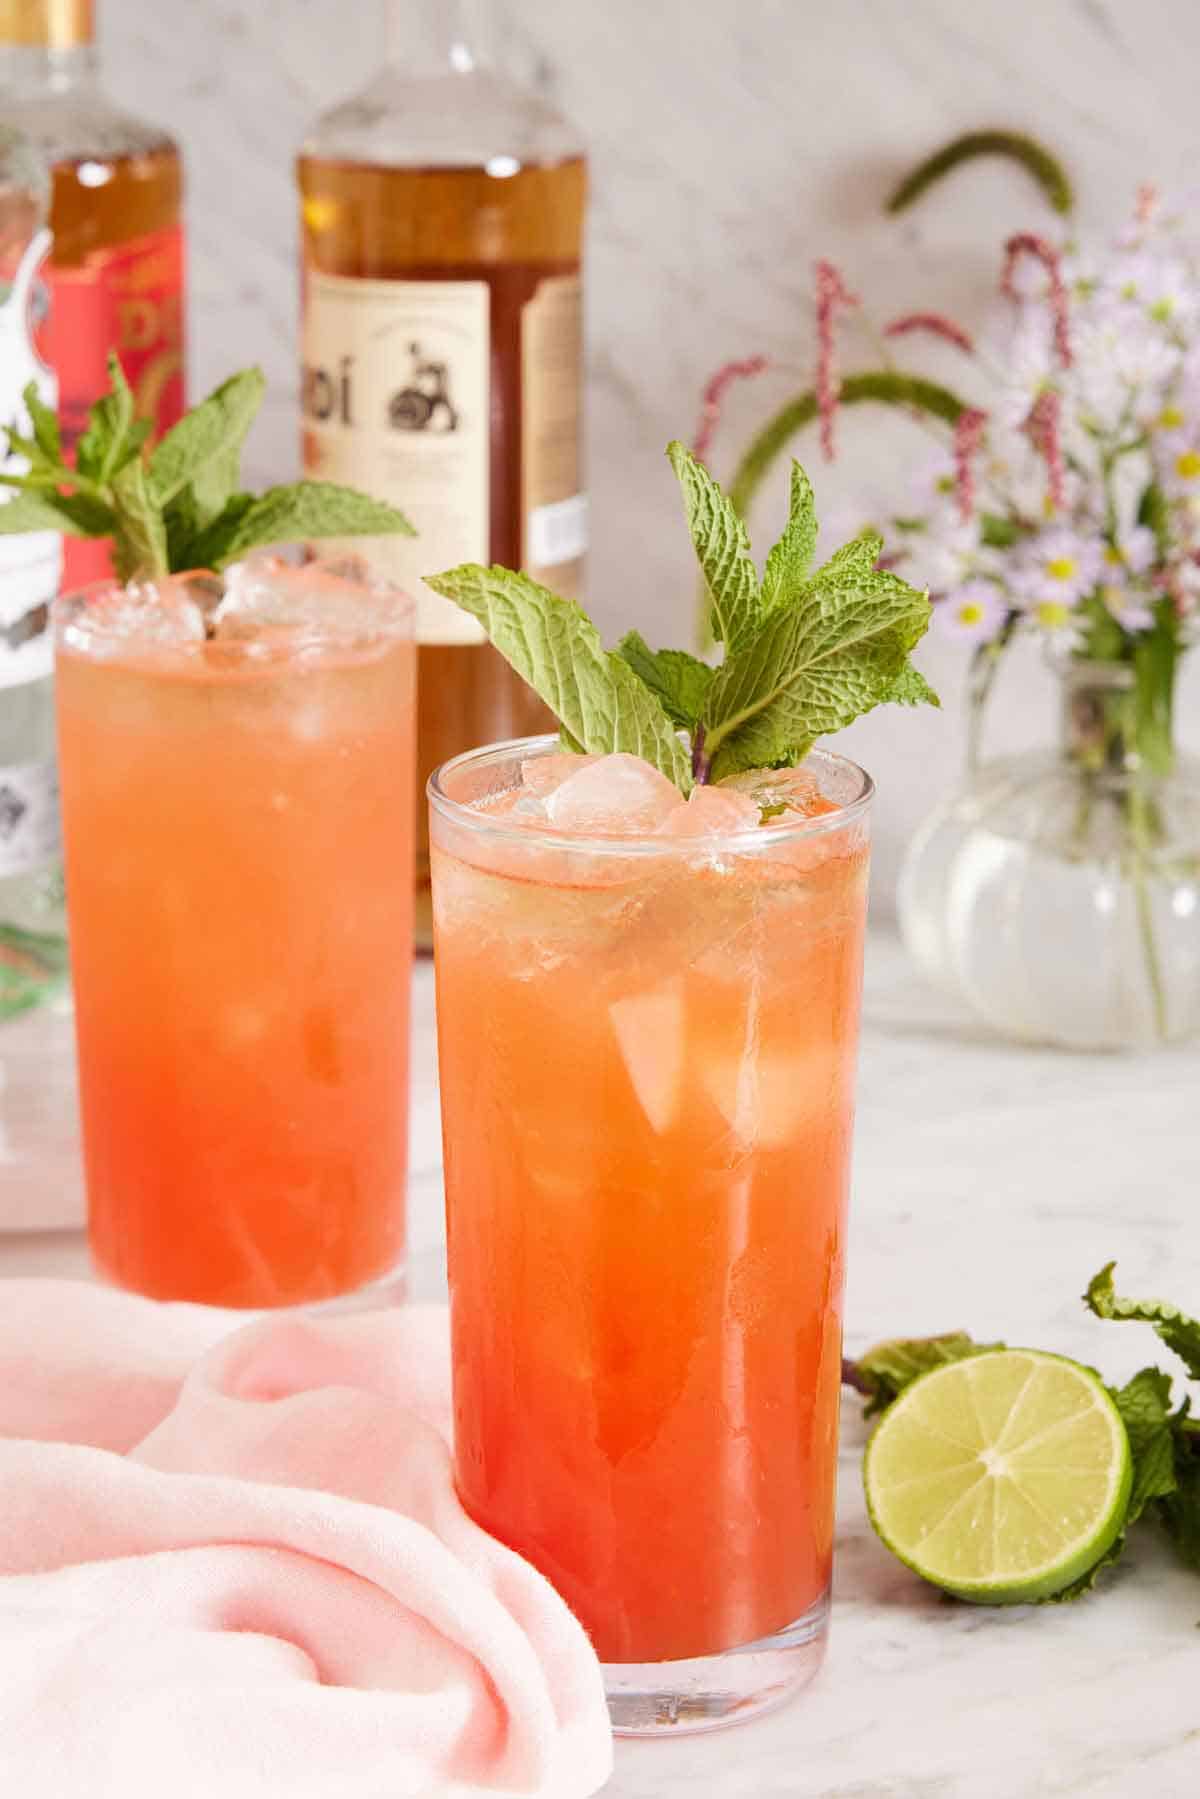 Two glasses of zombie cocktail garnished with mint and a cut lime beside the glasses. Flowers in the background with bottles of alochol.